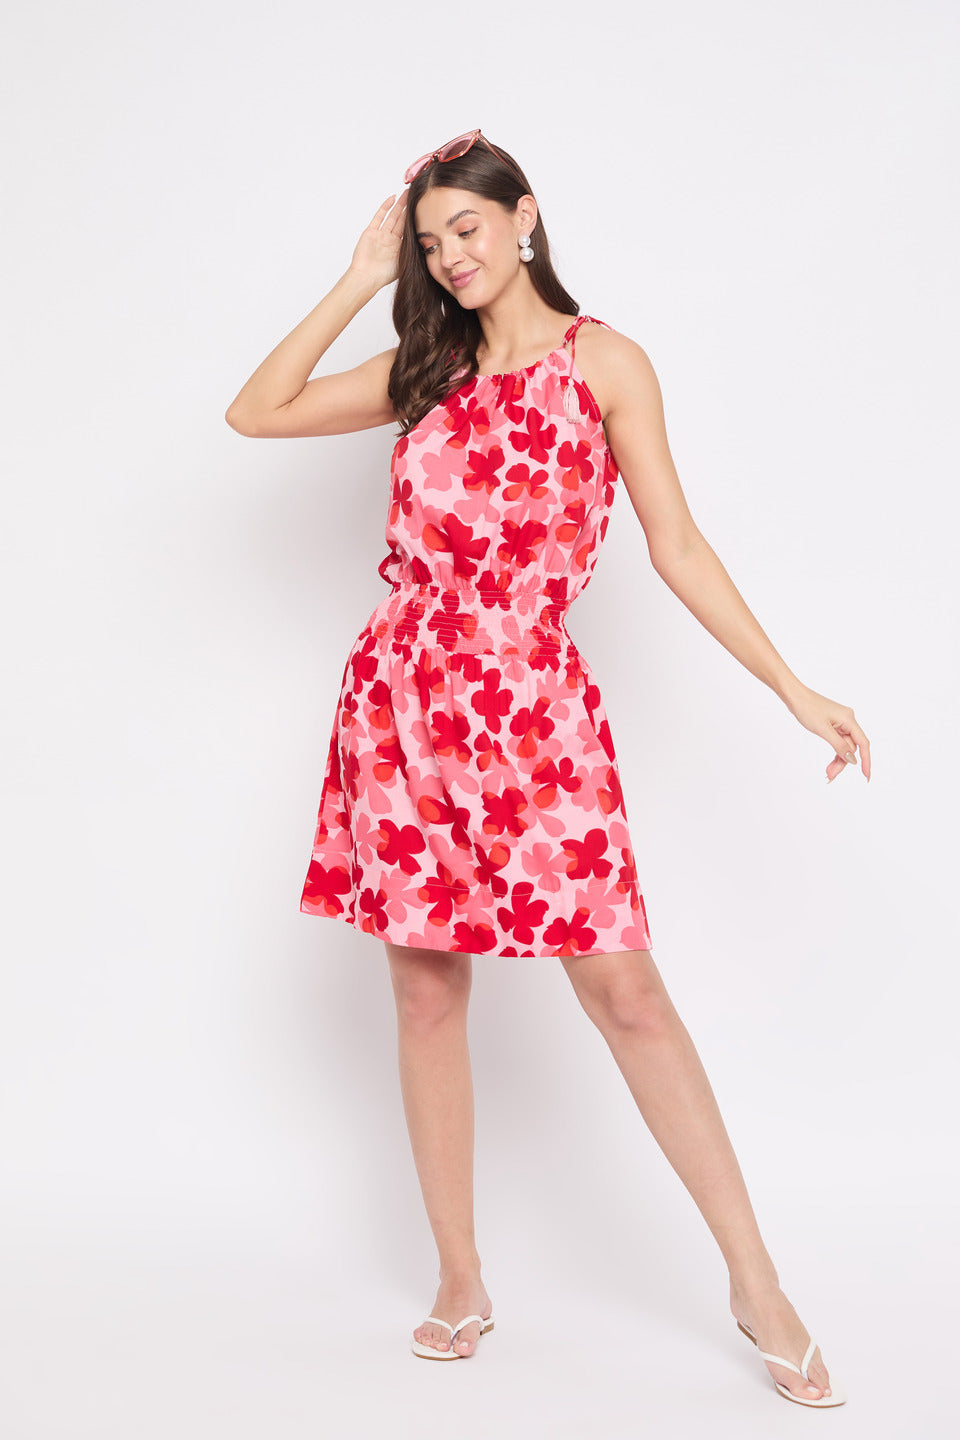 Floral Print Red & Pink Rayon Mini Dress For Women